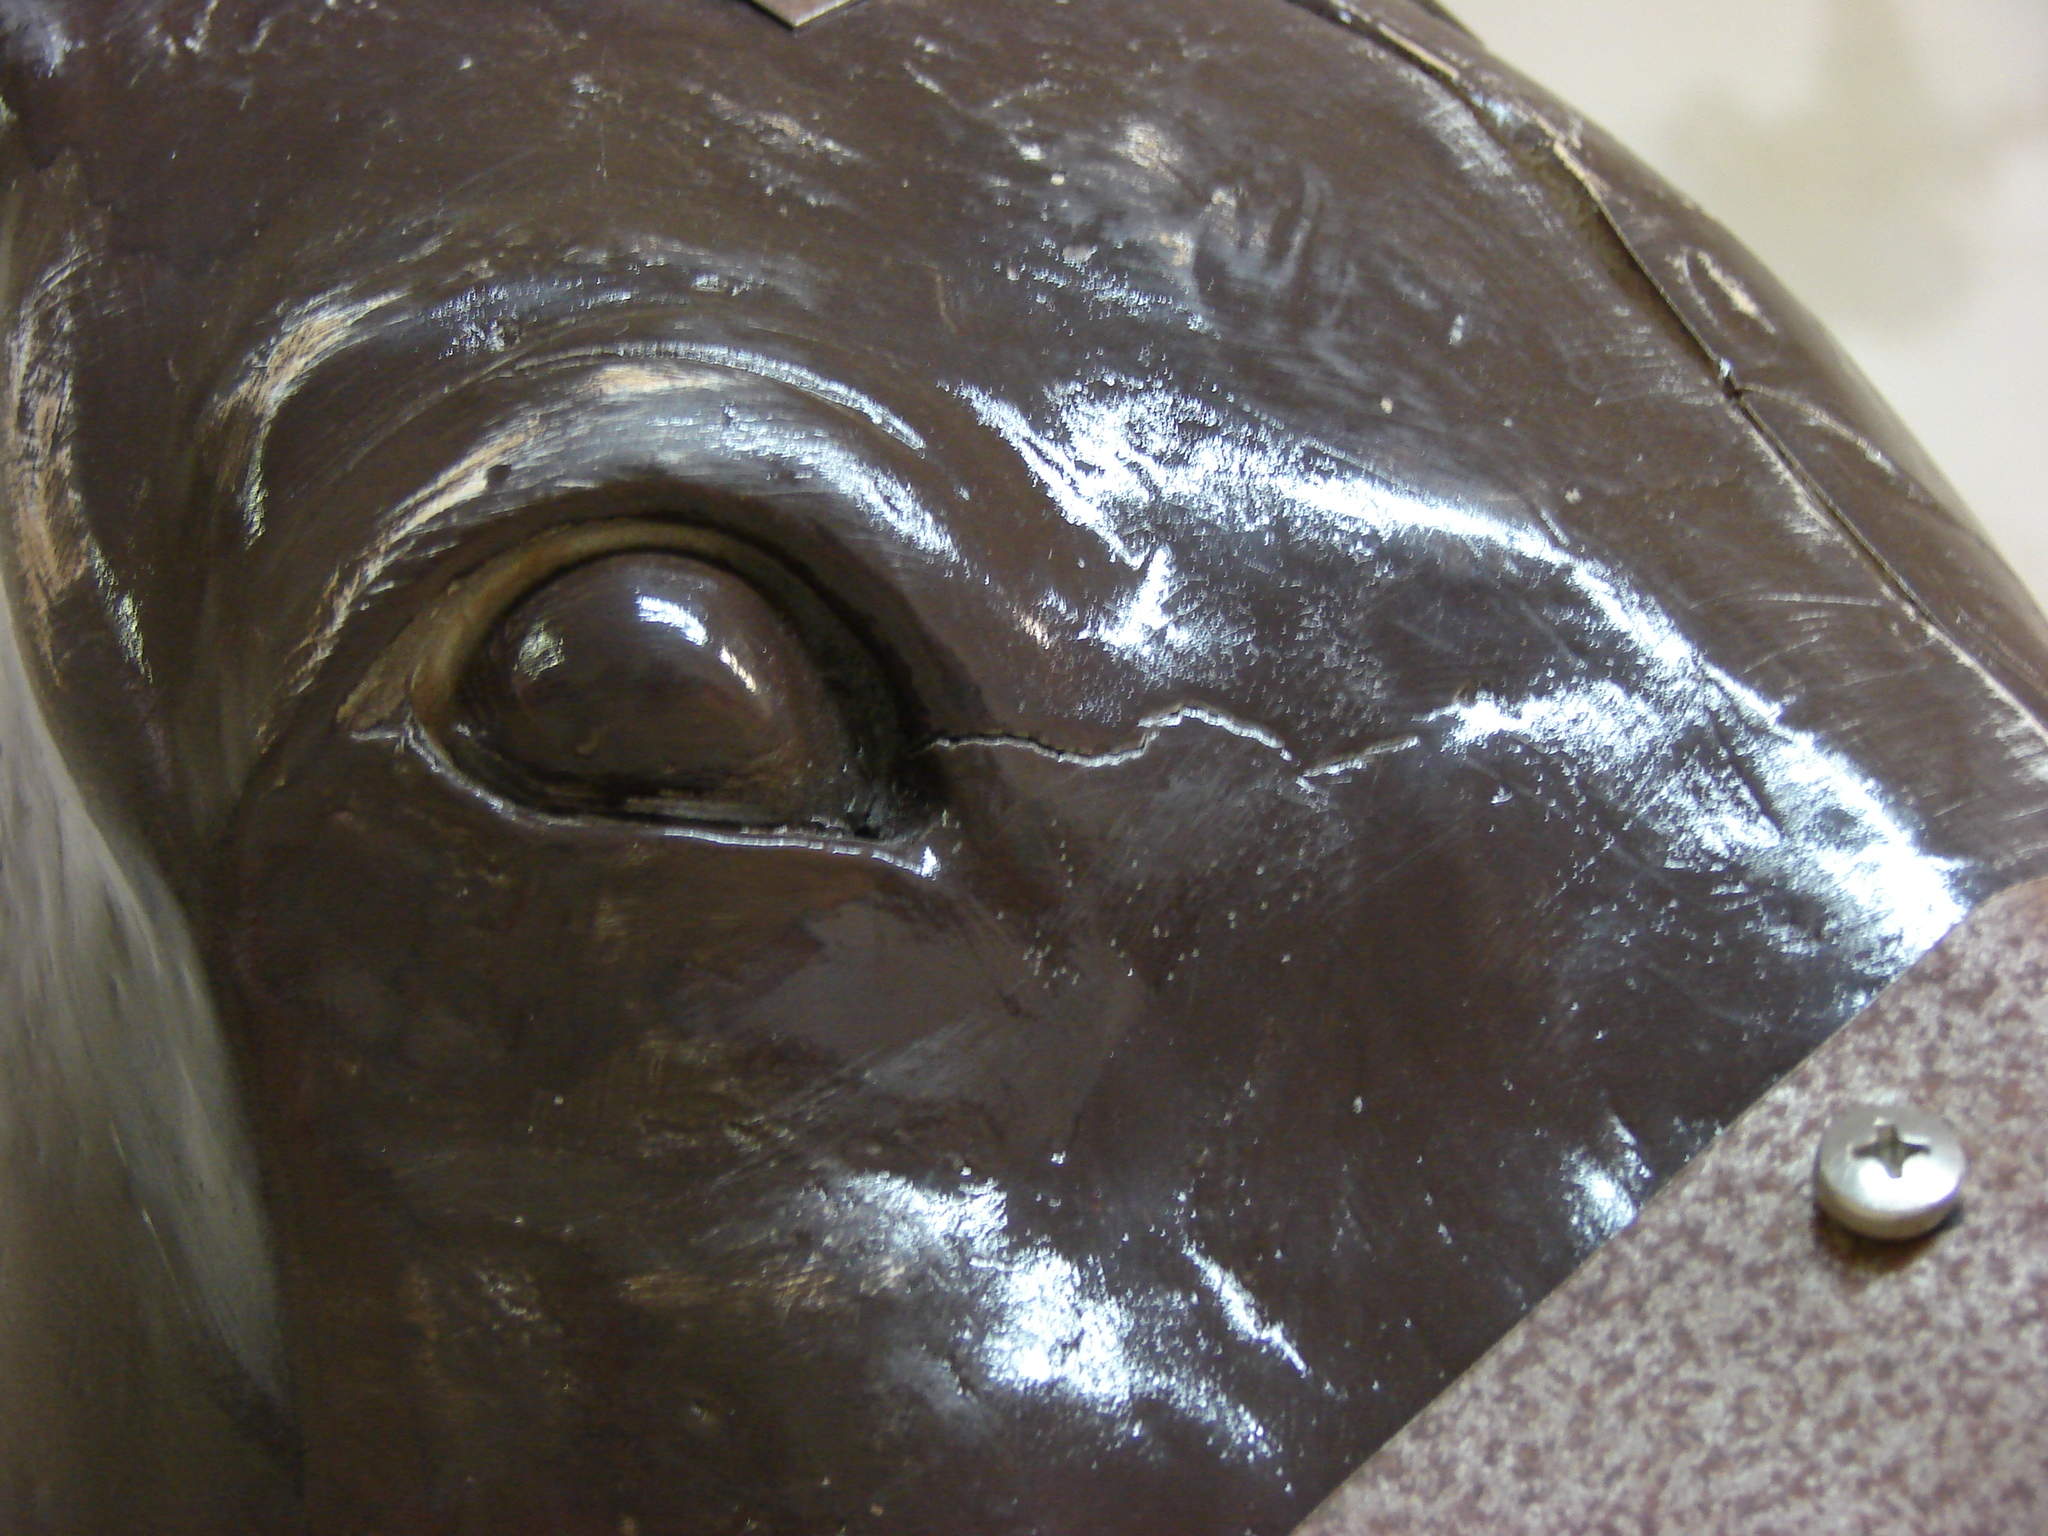 horse, ceramic and iron, Caterina Silenzi art.
PRIVATE COLLECTION